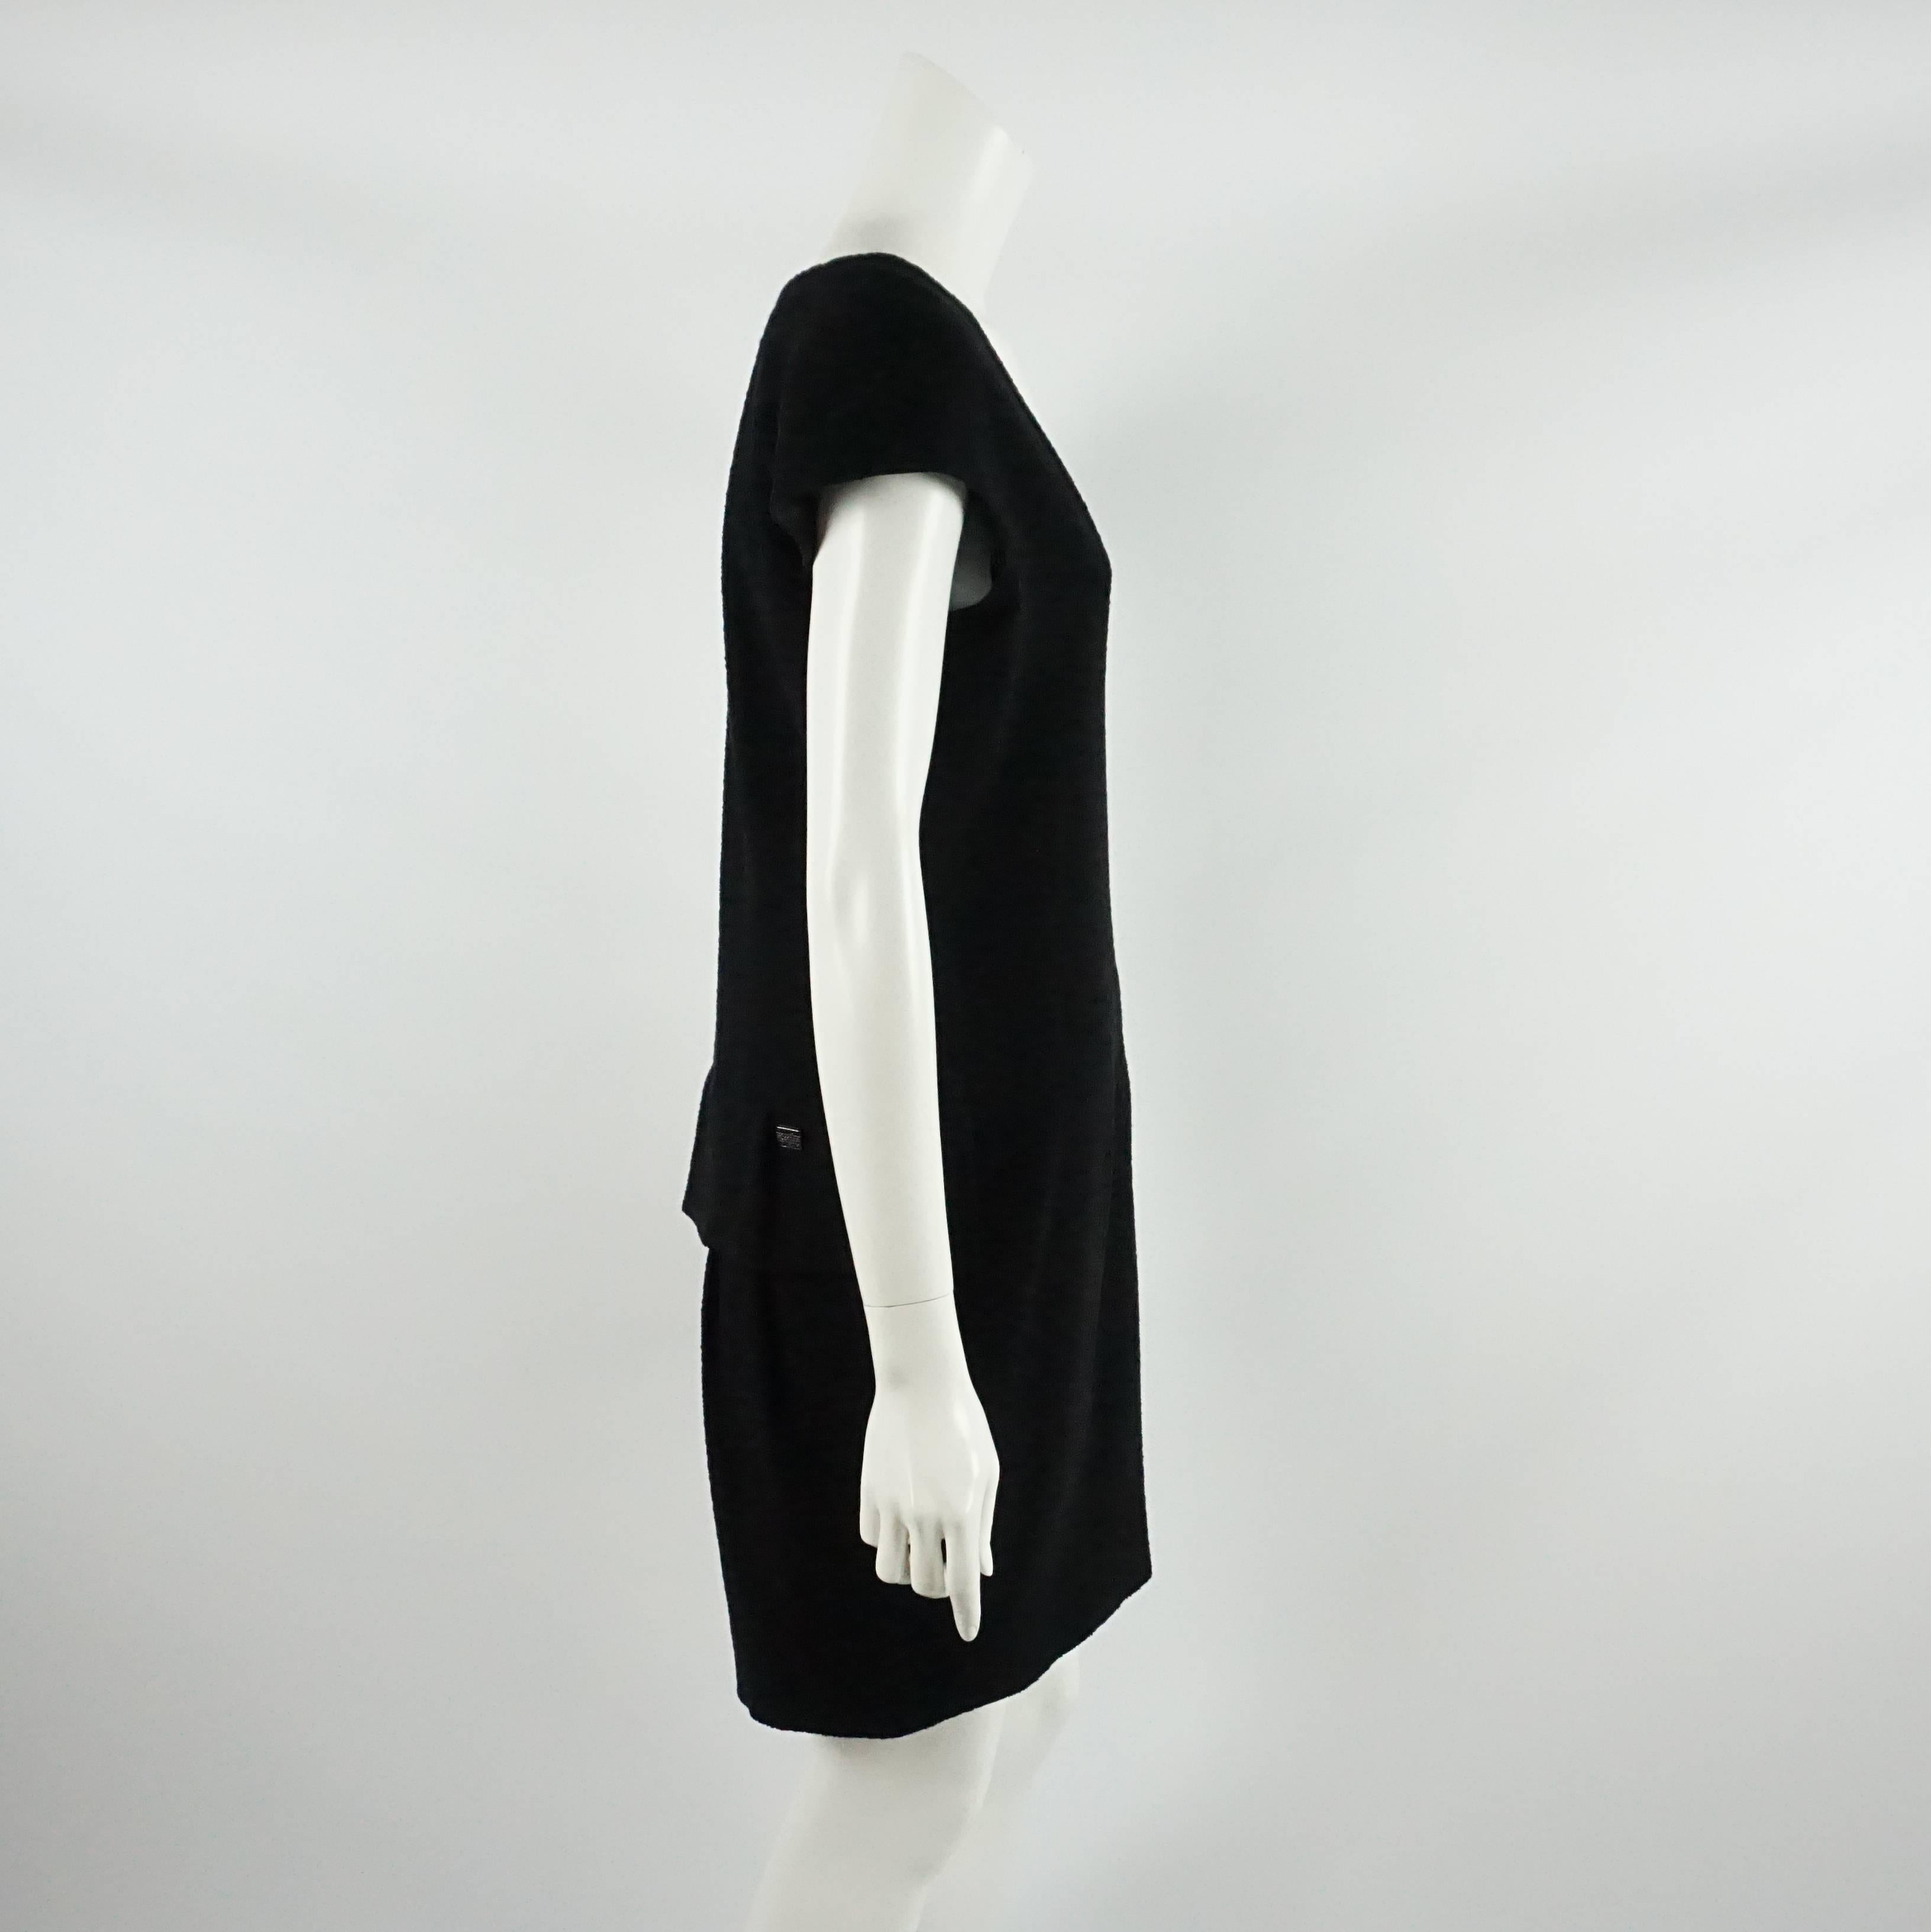 This Chanel black wool dress features a v-neck and a peplum in the back. On the peplum flap there is a rectangle with rhinestones and the Chanel logo. This dress is in excellent condition.